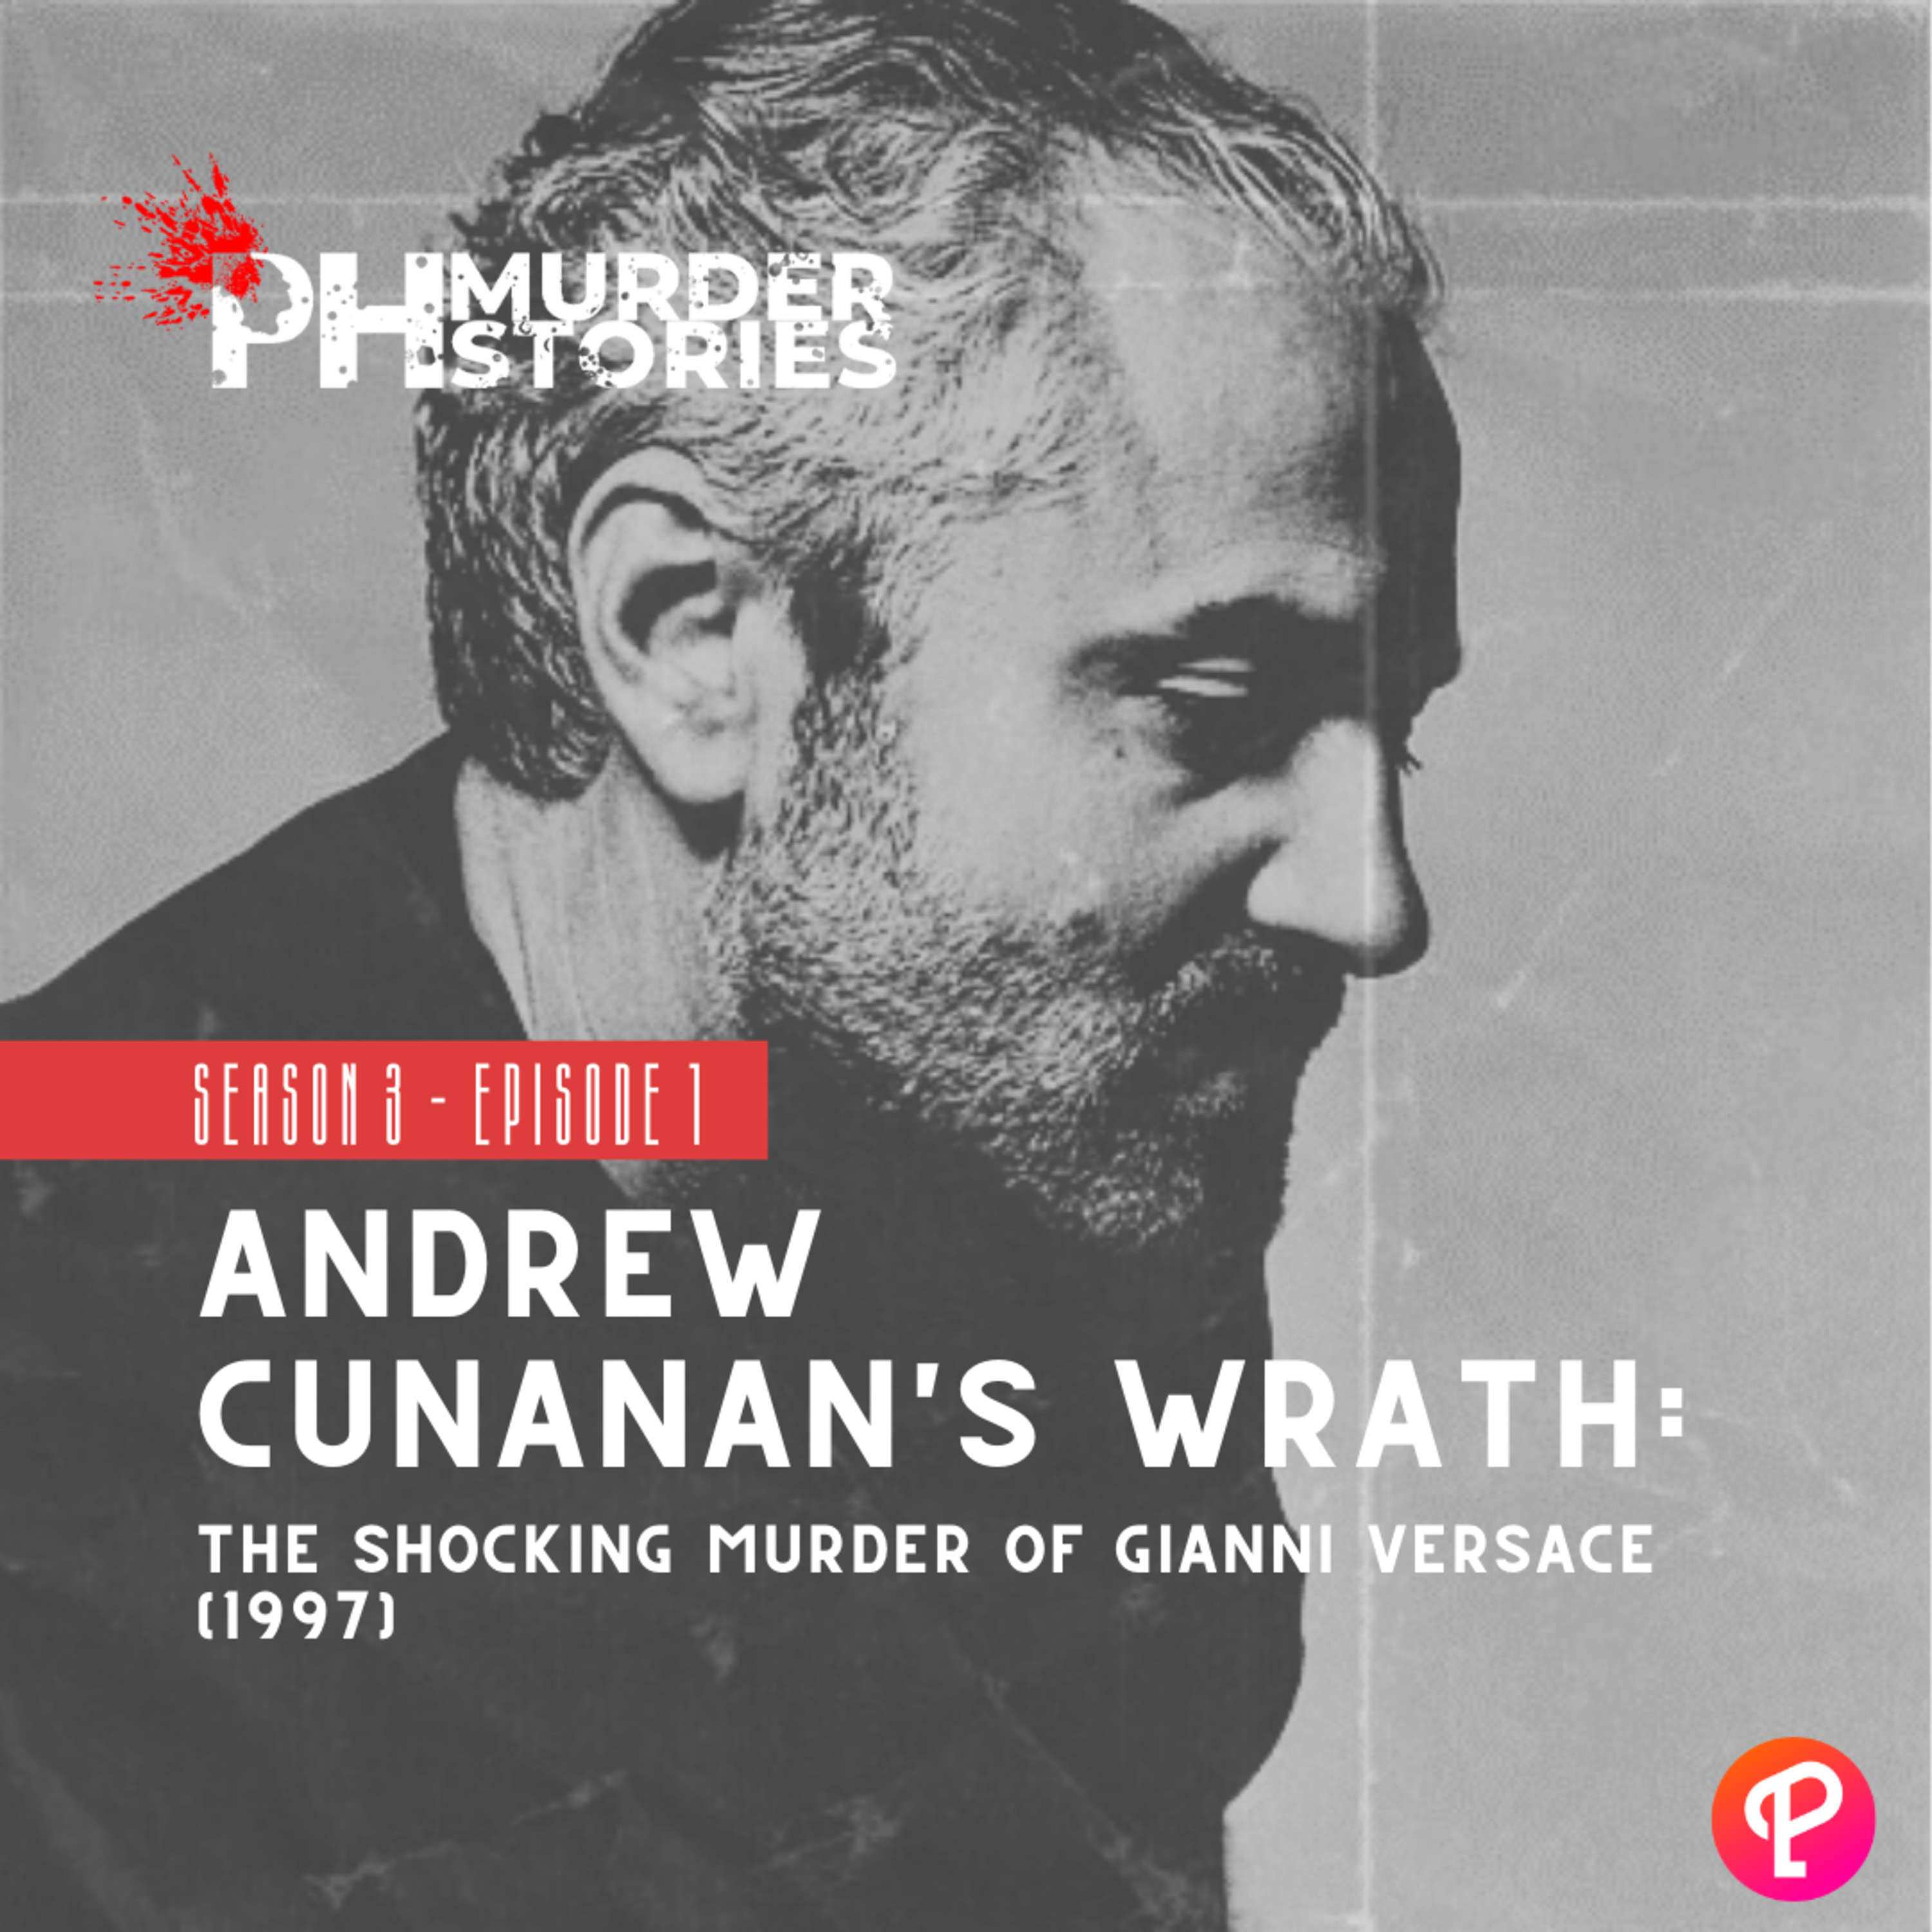 Andrew Cunanan’s Wrath: The Shocking Murder of Gianni Versace (1997)